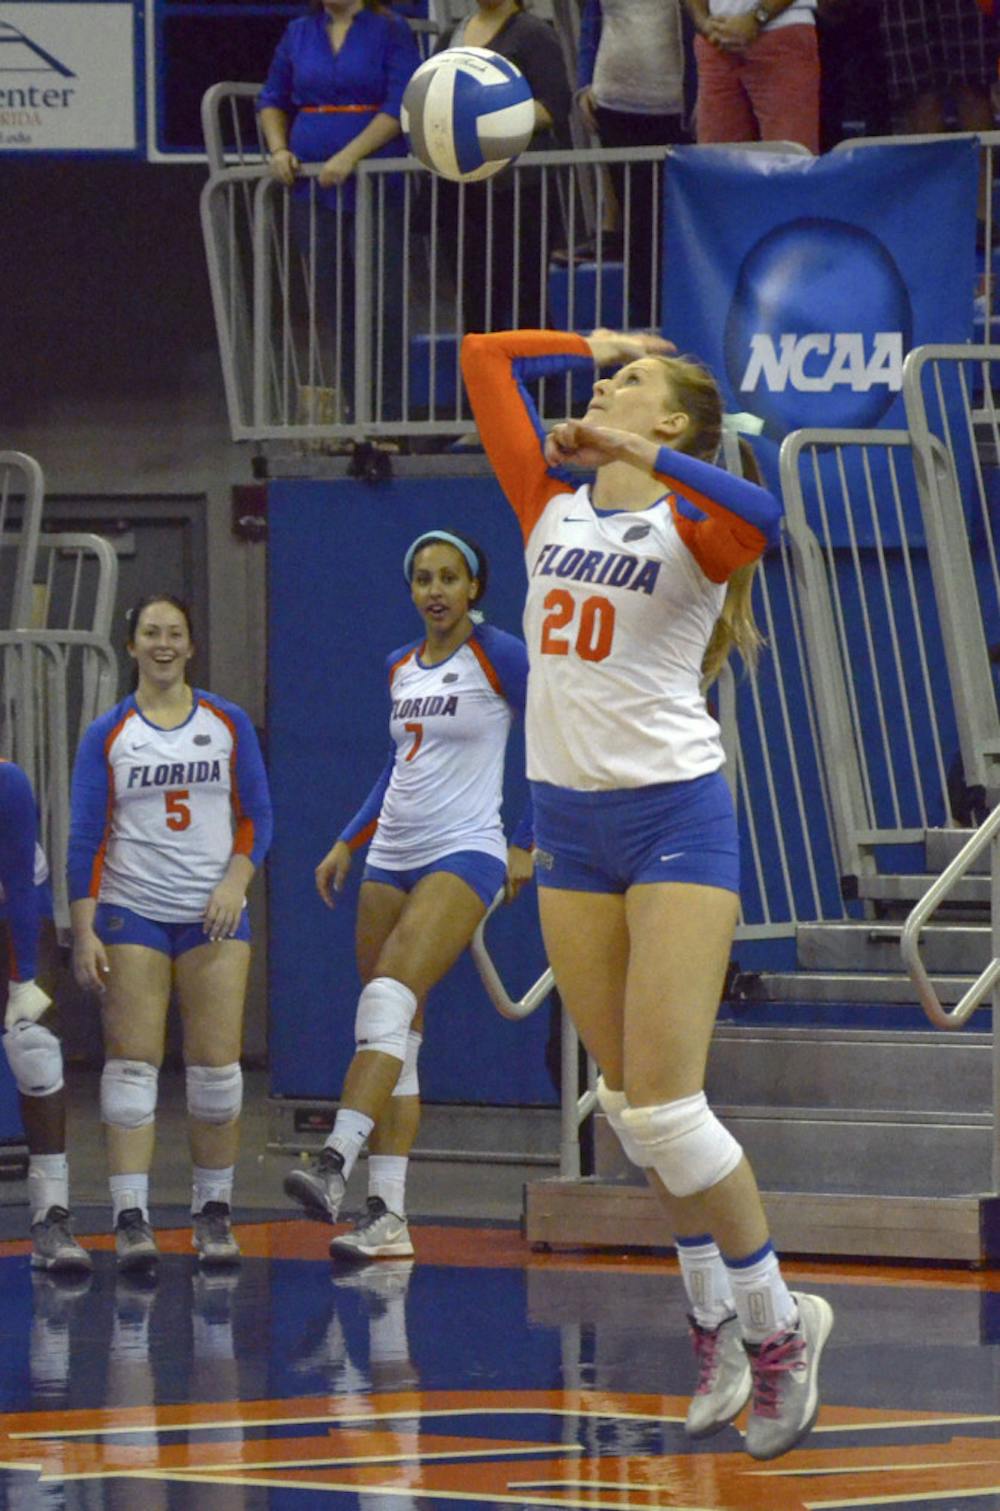 <p>Defensive Specialist Nikki O'Rourke serves during Florida's 3-1 win against Miami in the second round of the NCAA Tournament on Dec. 6 in the O'Connell Center.</p>